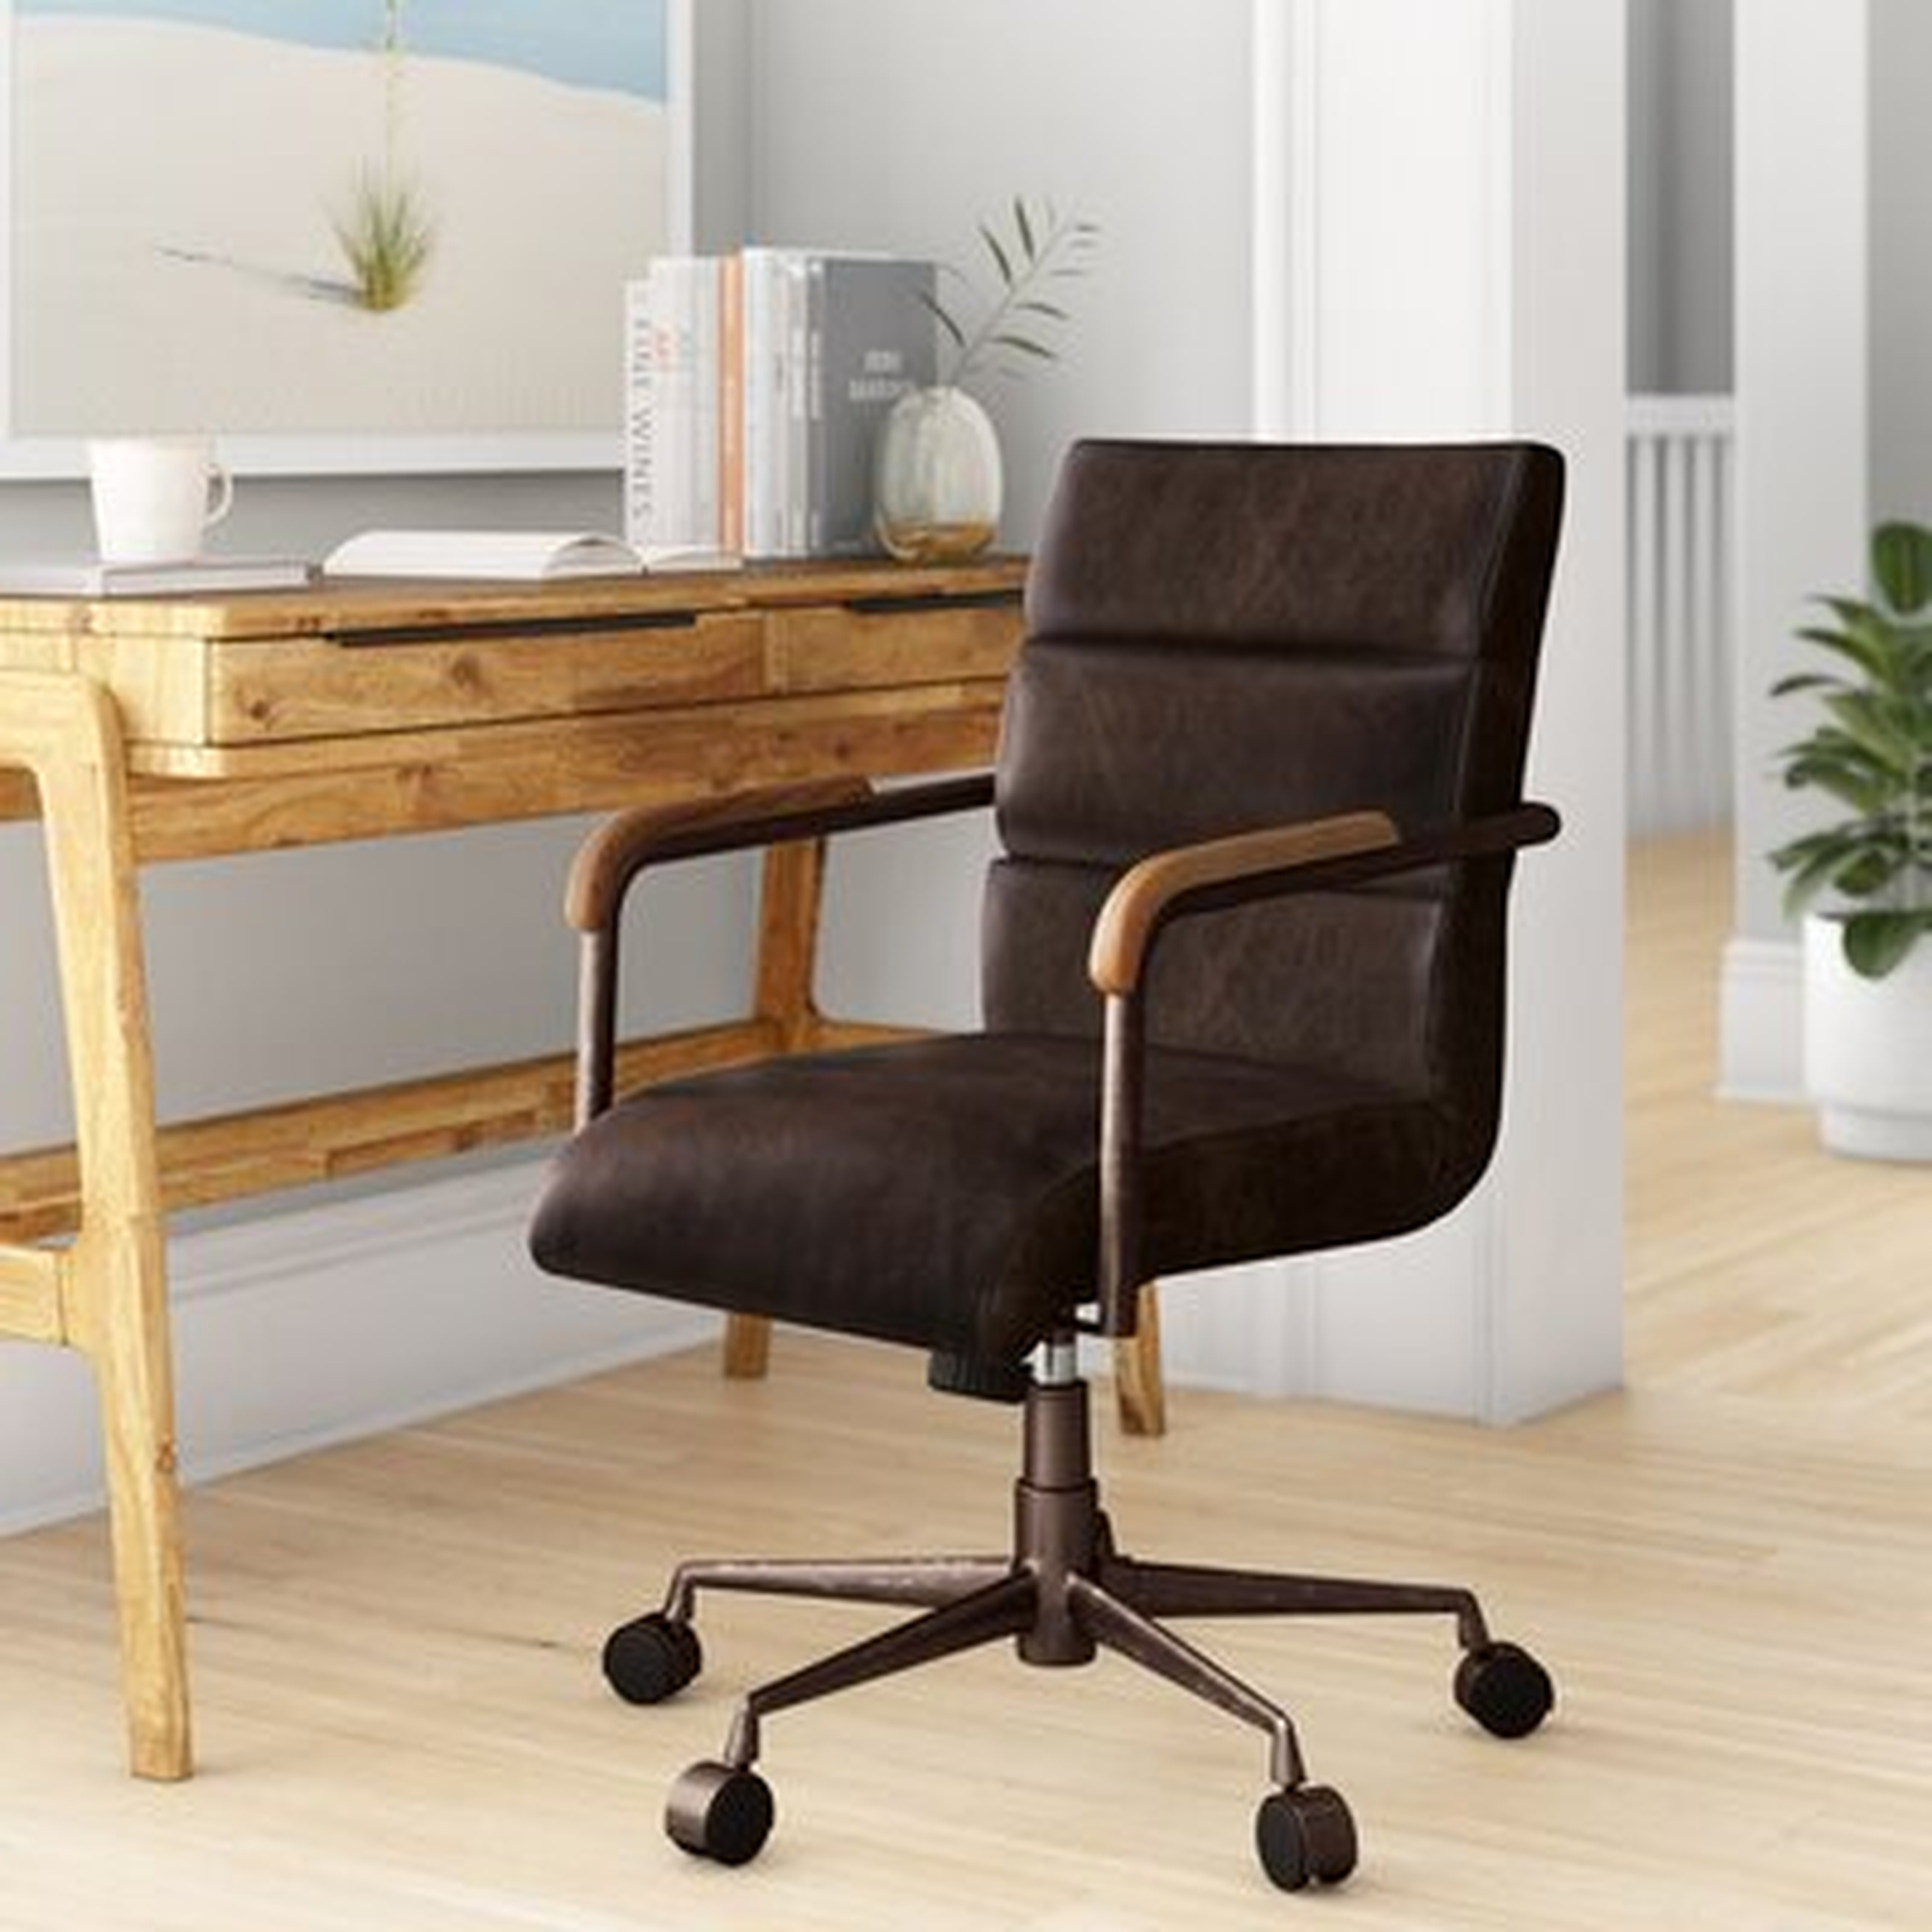 Hortencia Genuine Leather Conference Chair - Wayfair